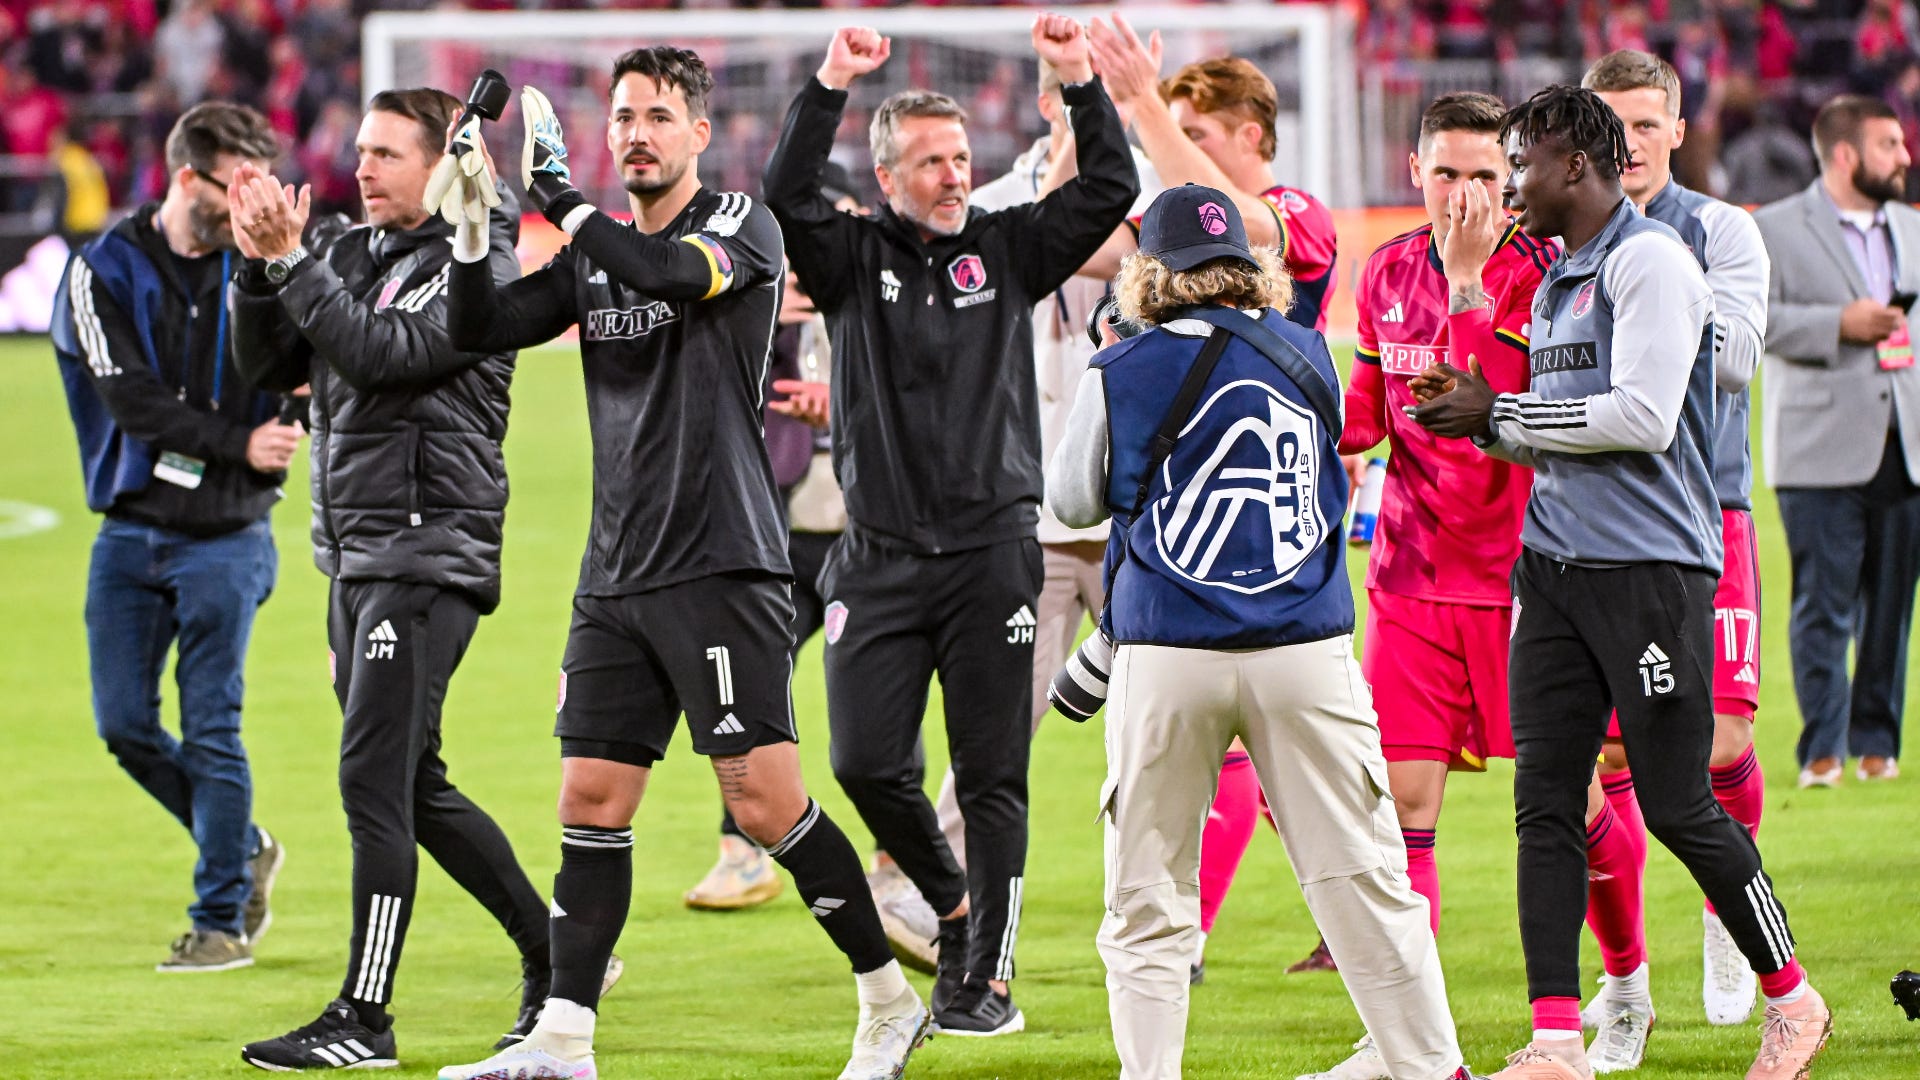 St. Louis City SC falls to Kansas City in first playoff game